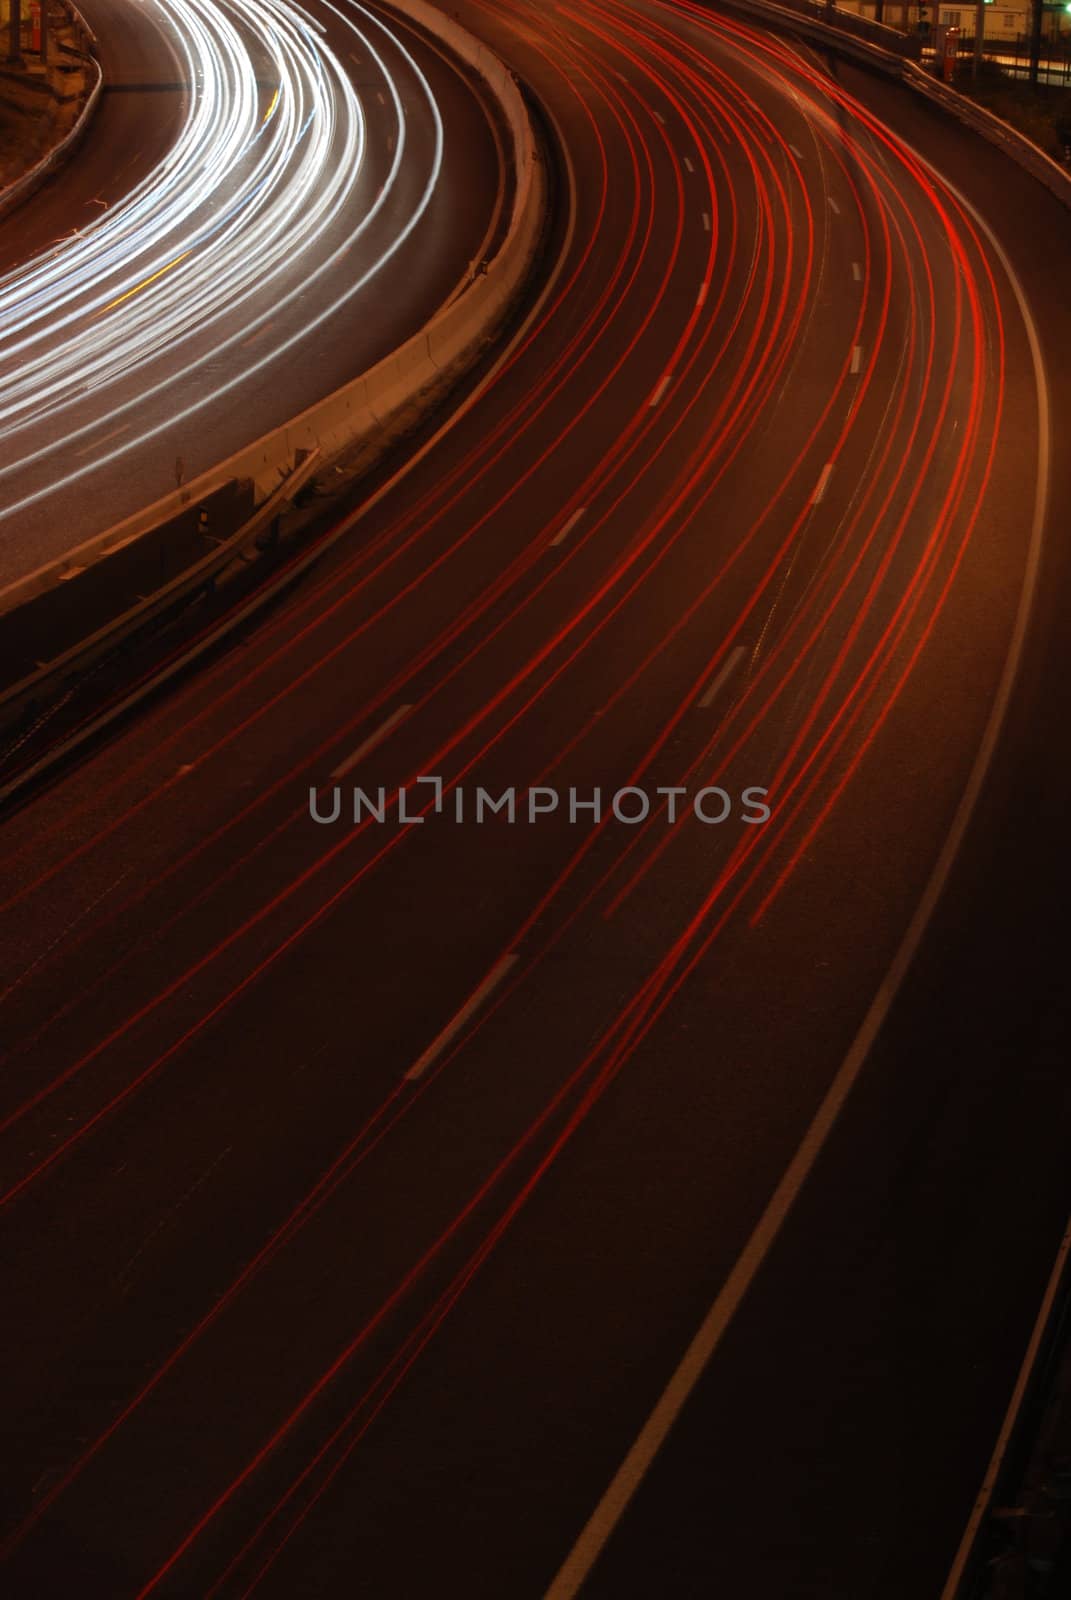 Freeway traffic on the city (car blur motion) by luissantos84